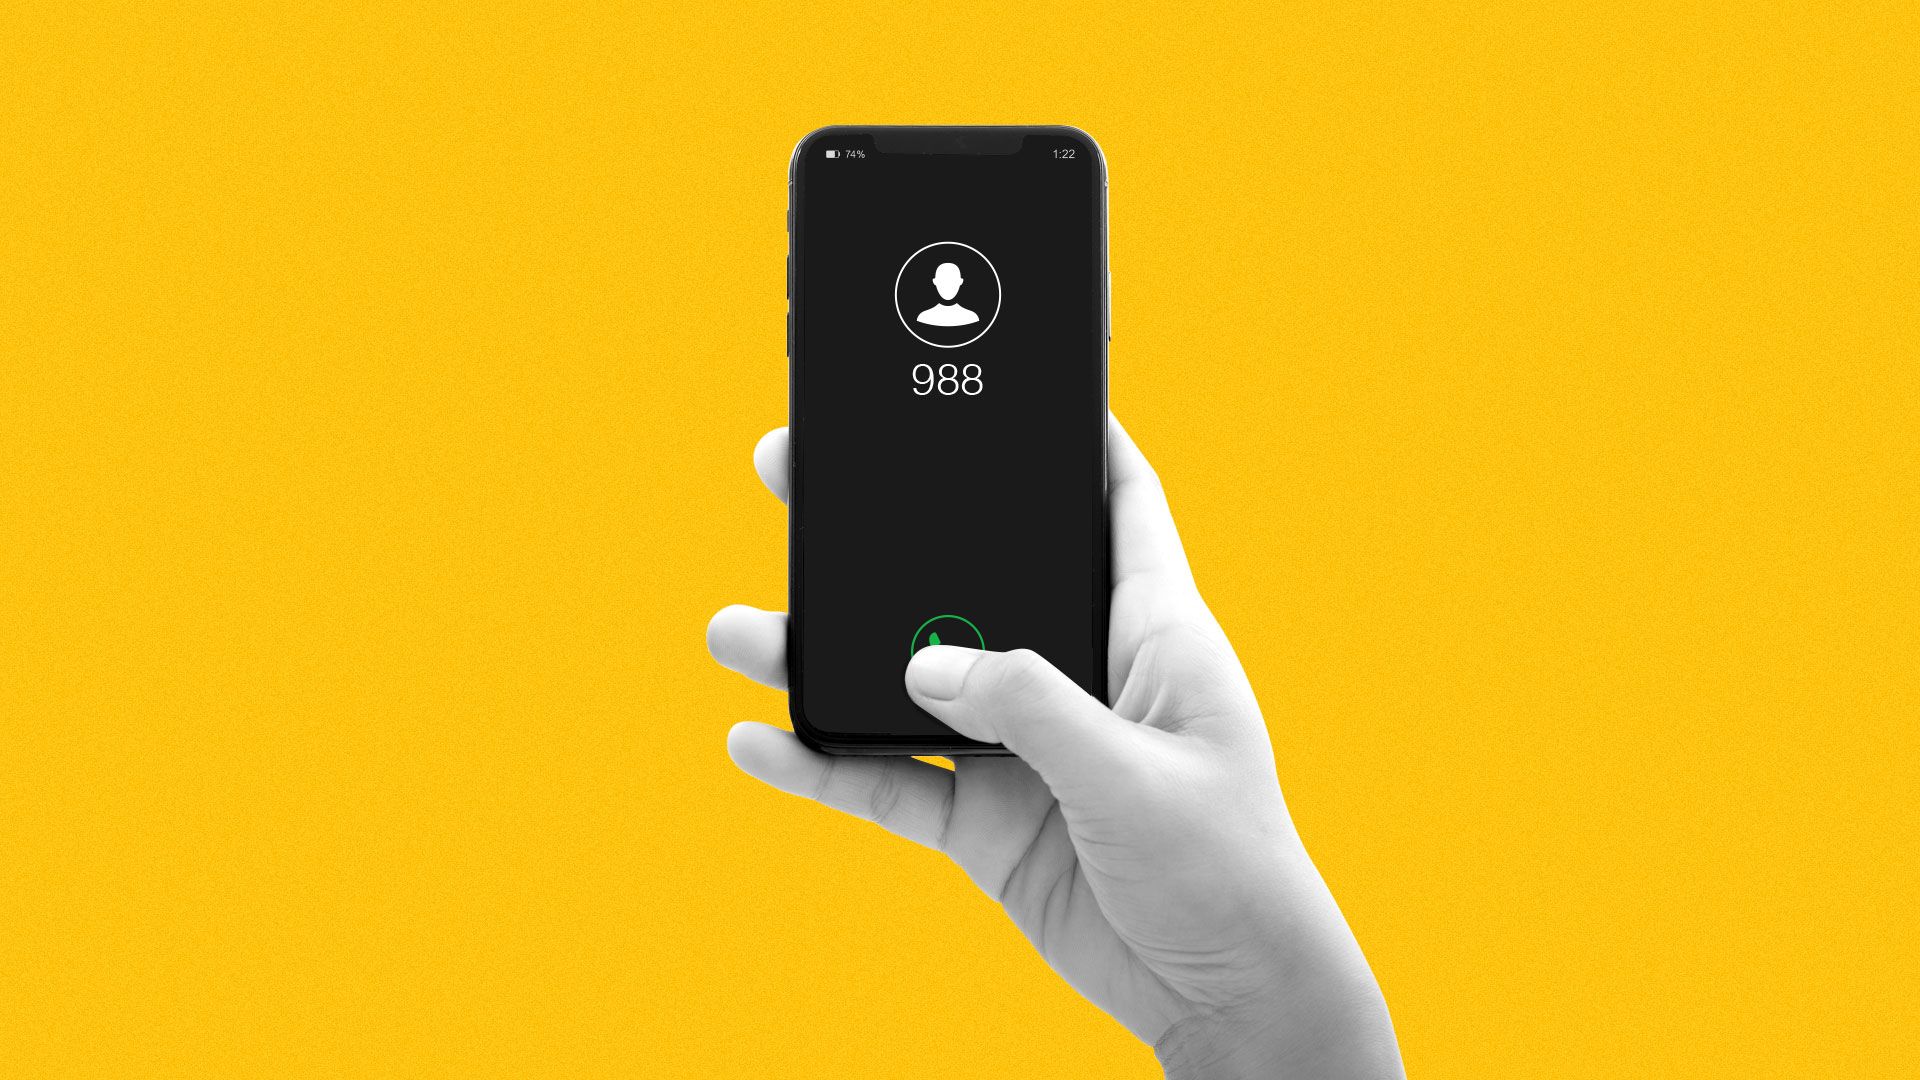 Illustration of person dialing 988 on smartphone.